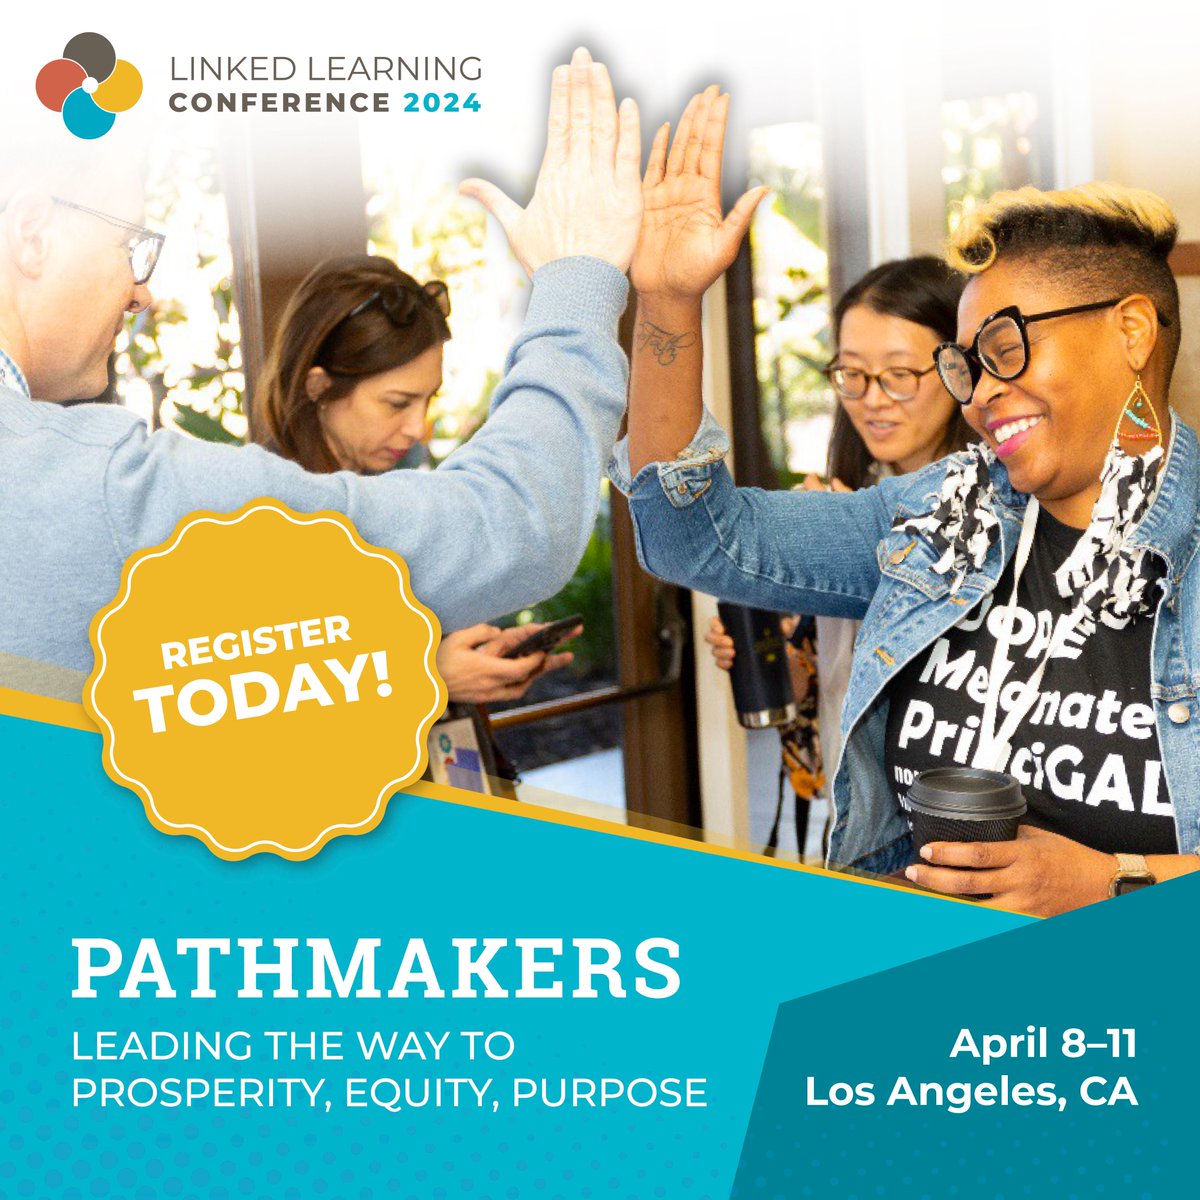 Where else can you find groundbreaking conversations at the intersection of workforce, education, community, and equity? We are excited for the #LLConference2024 with @linked_learning. Register today and discover the power of PLUS. linkedlearning.org/conference